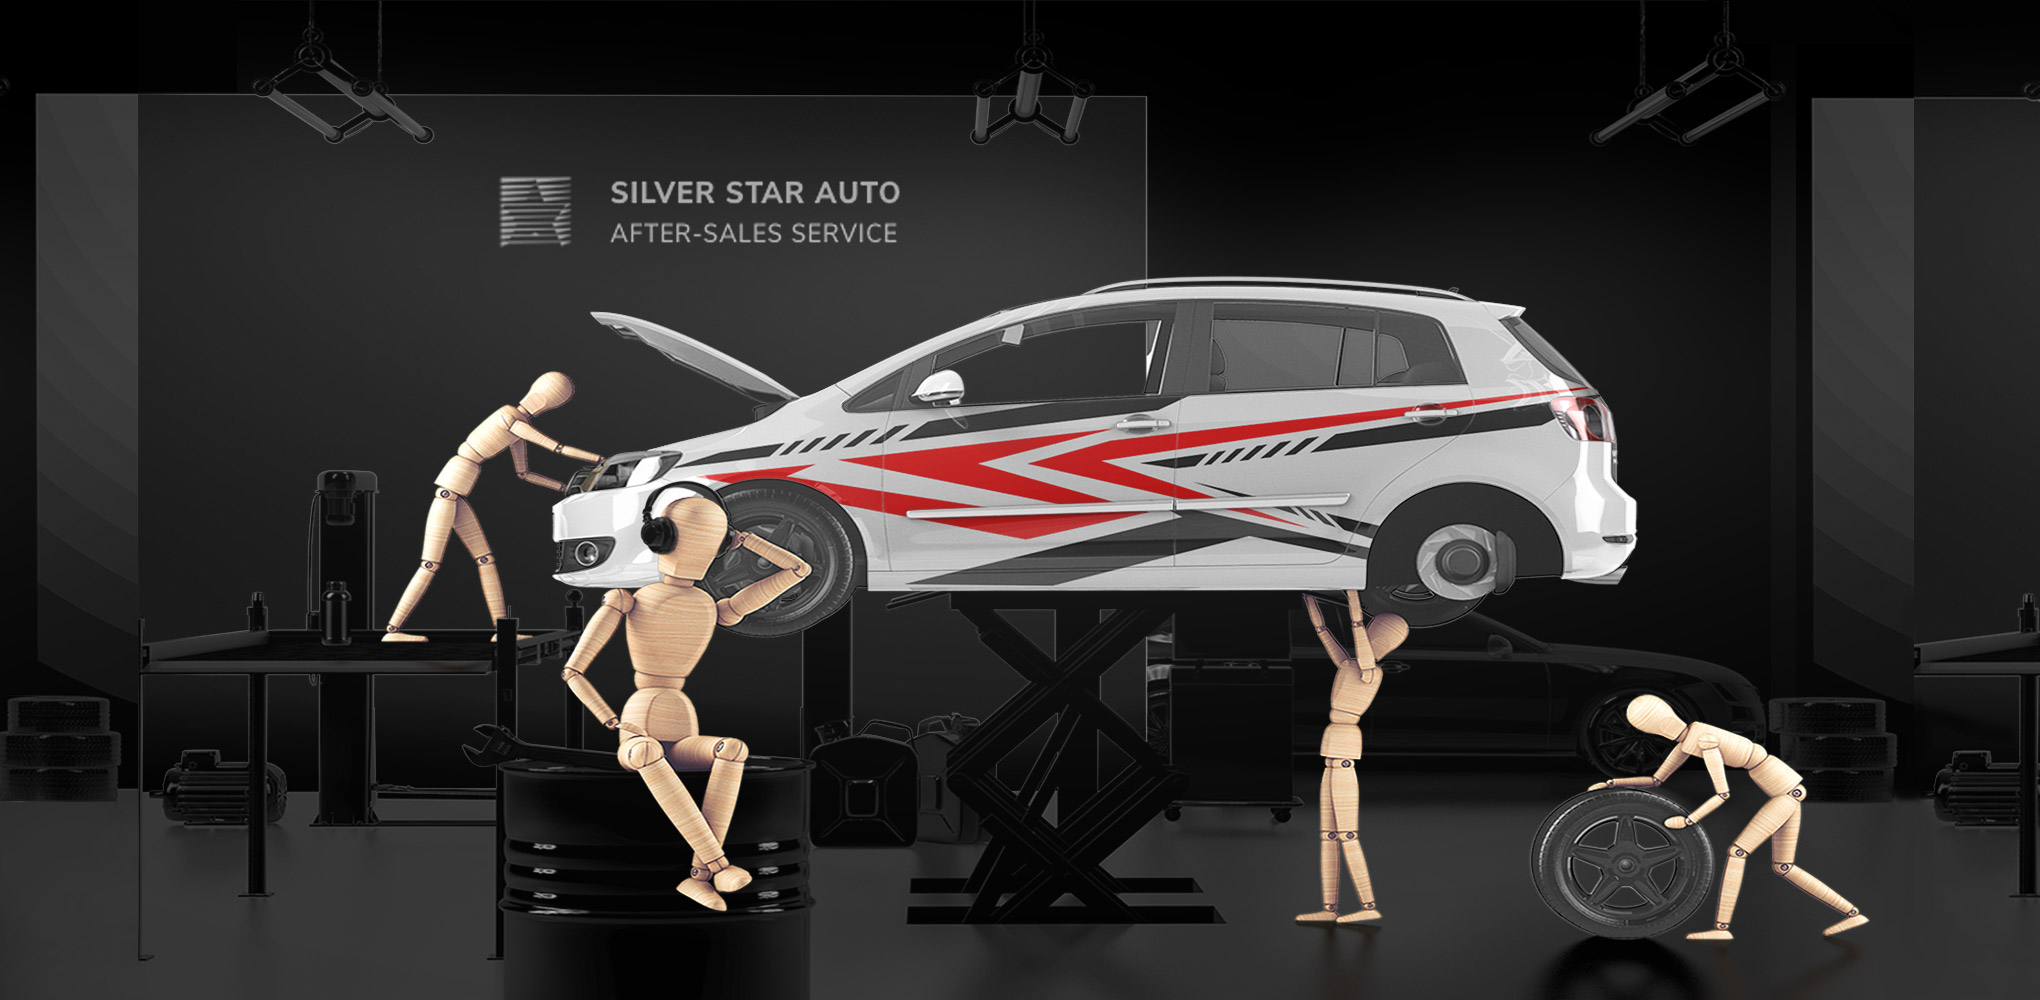 Silver Star Auto After Sales Service Image